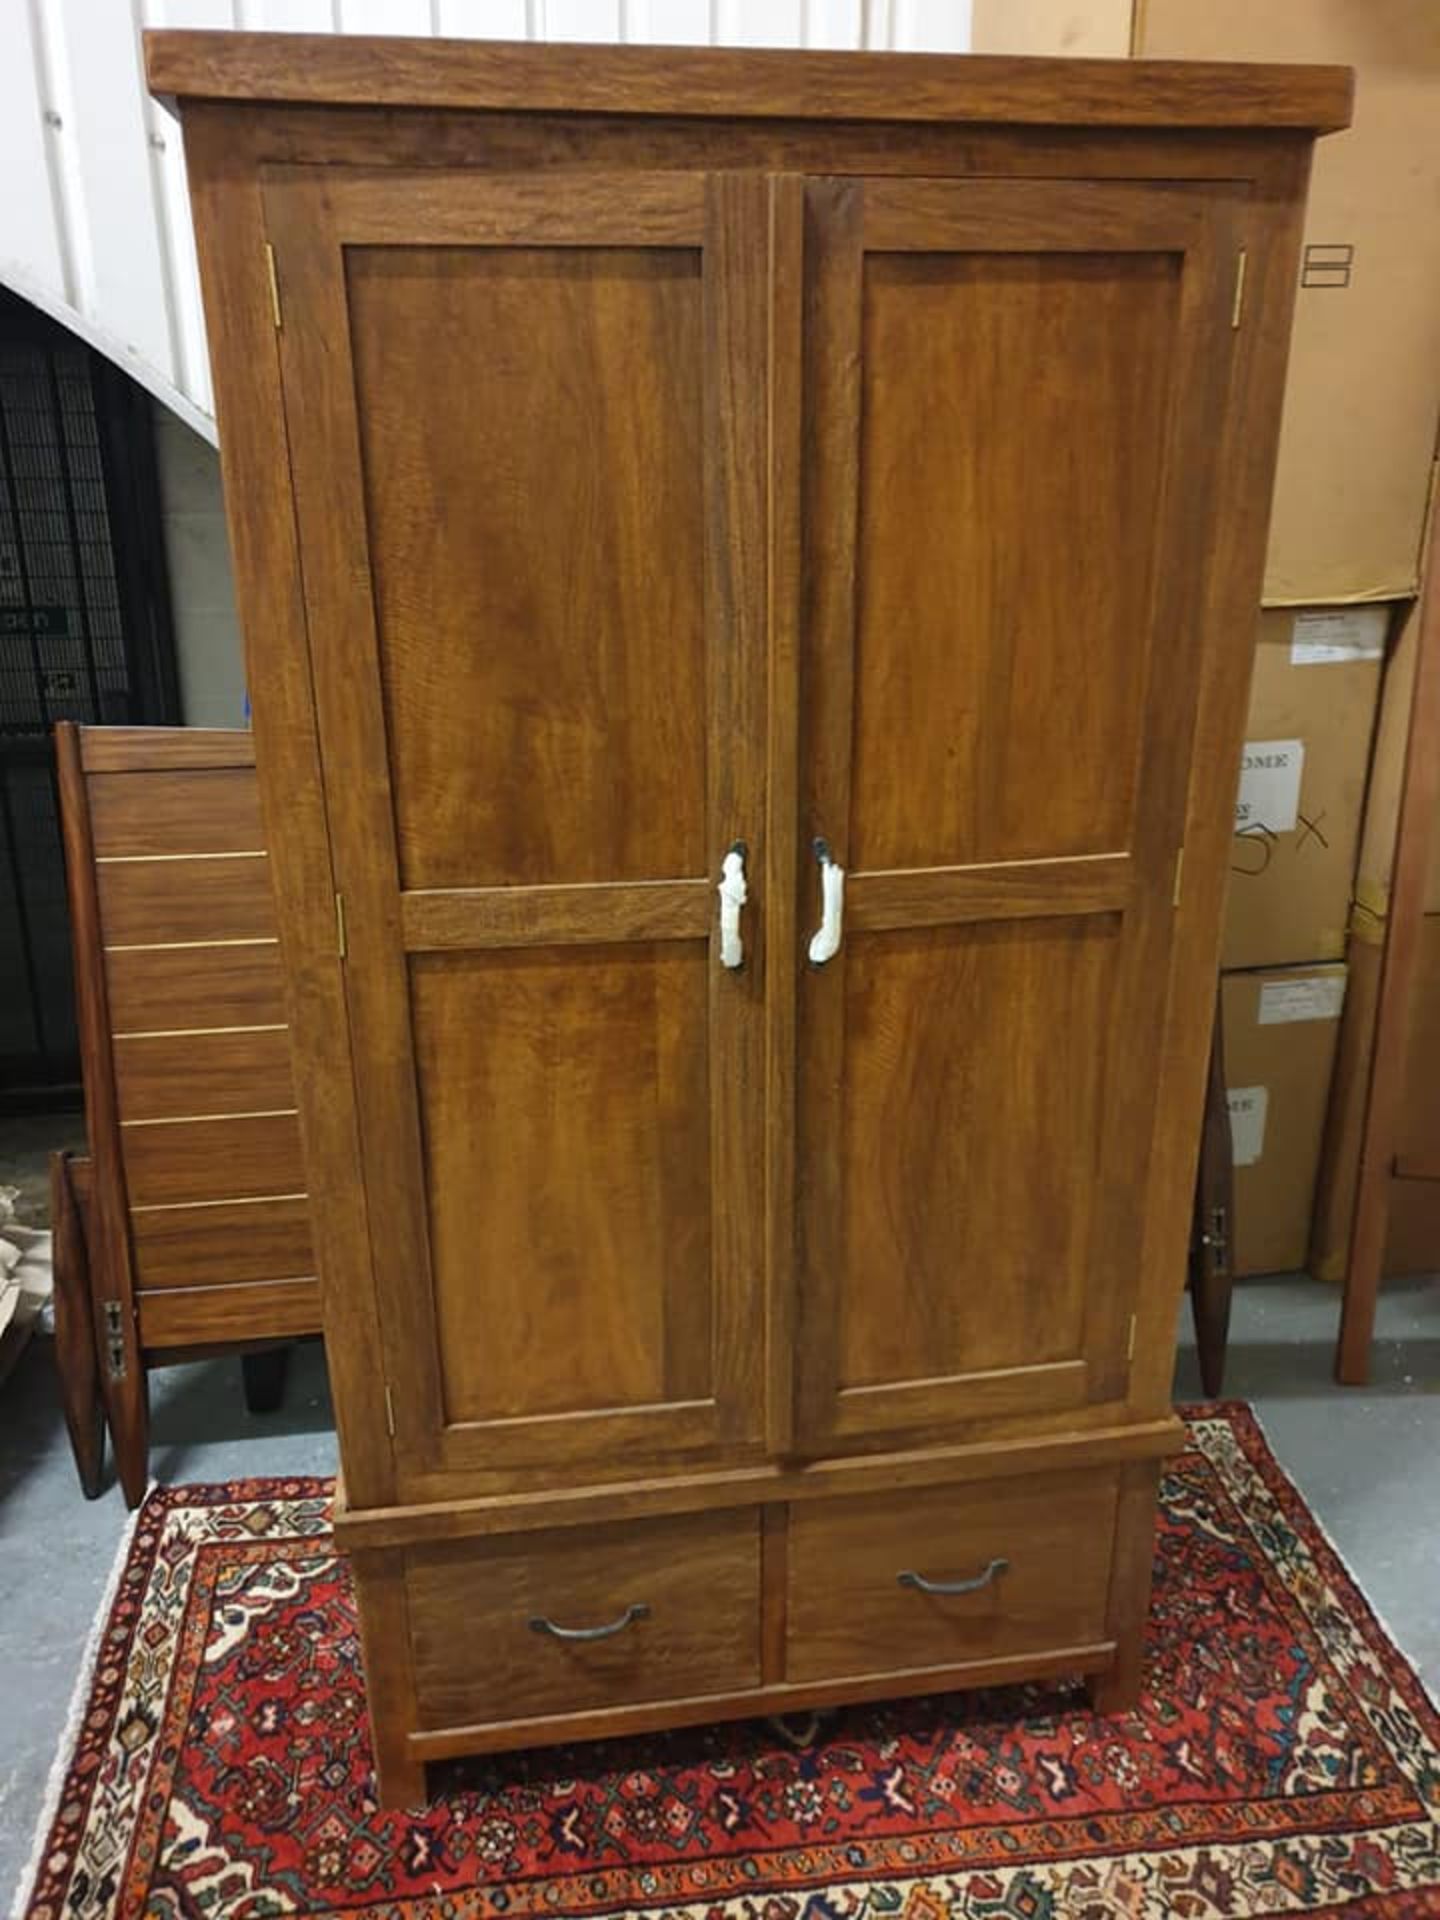 Soho Solid Wood Double Wardrobe With Base Drawer This Wardrobe will look stunning in your bedroom,